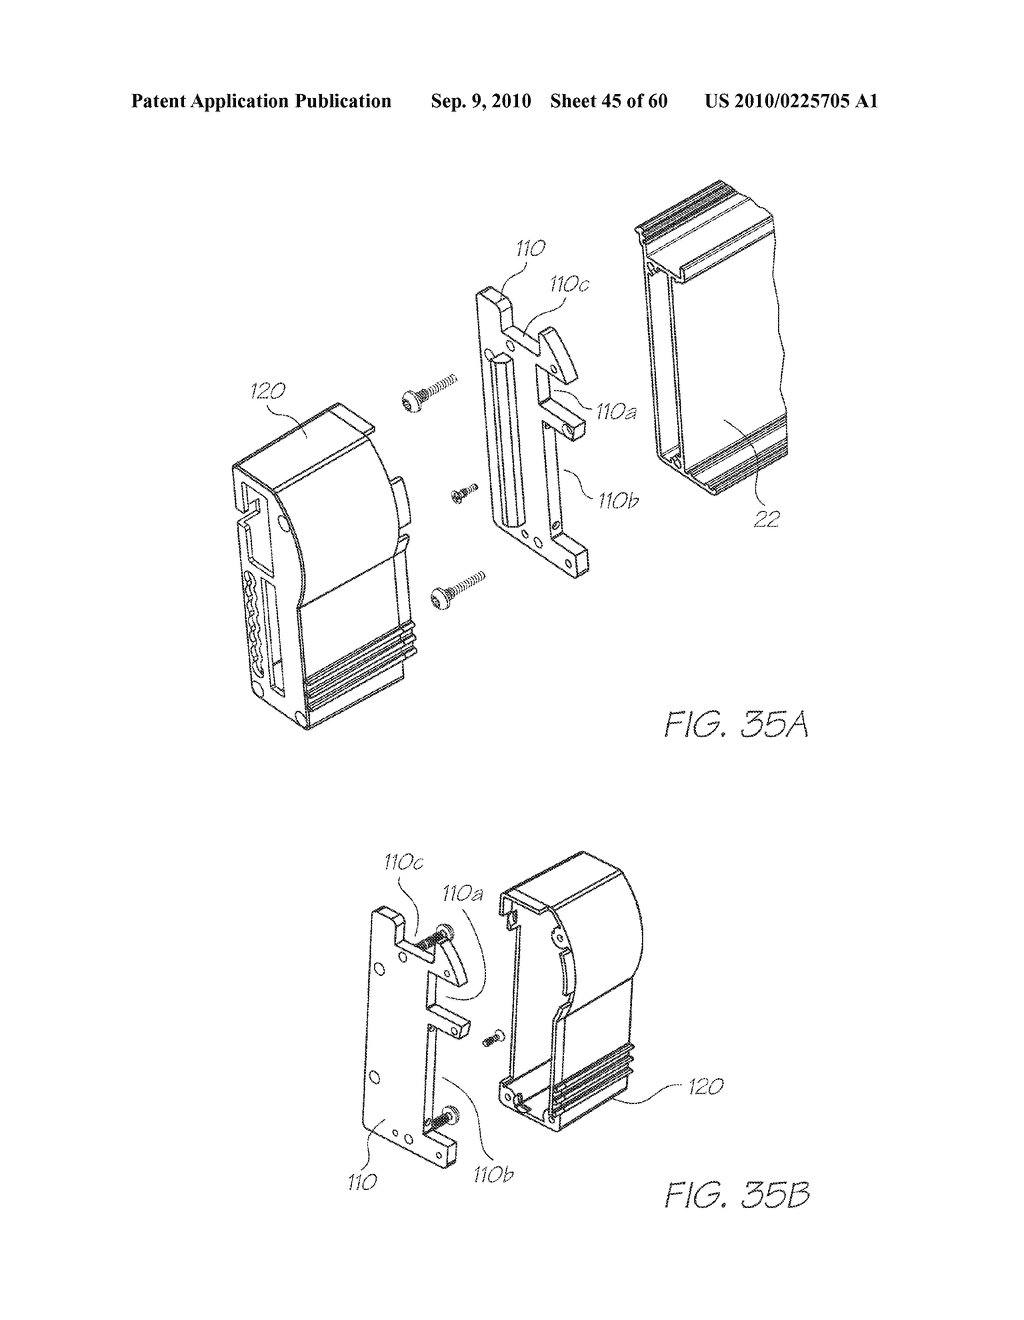 PRINTHEAD ASSEMBLY HAVING MODULAR PRINTHEAD TILE SUPPORT STRUCTURE WITH INTEGRATED ELECTRICAL CONNECTOR ASSEMBLIES - diagram, schematic, and image 46